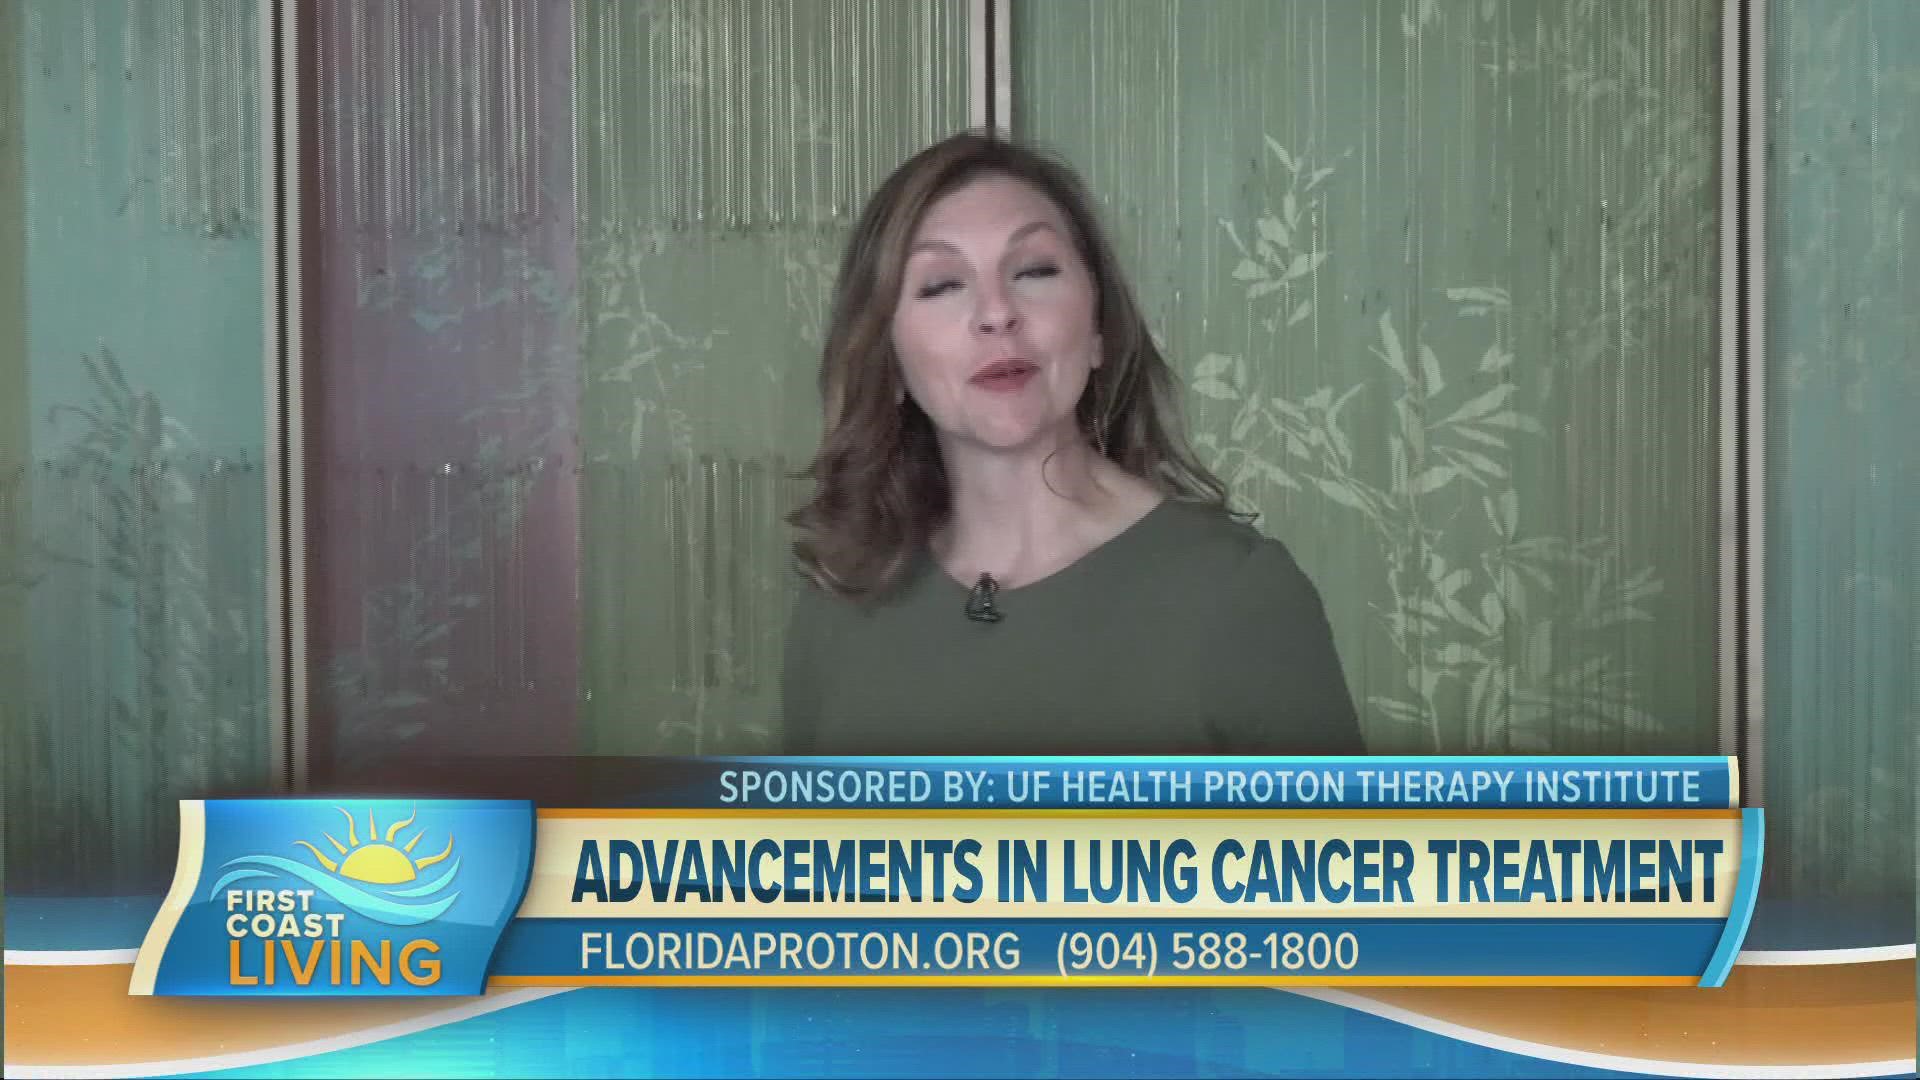 Radiation Oncologist at UF Health Proton Therapy Institute, Dr. Eric Brooks shares some of the most innovative cancer treatments happening here on the First Coast.